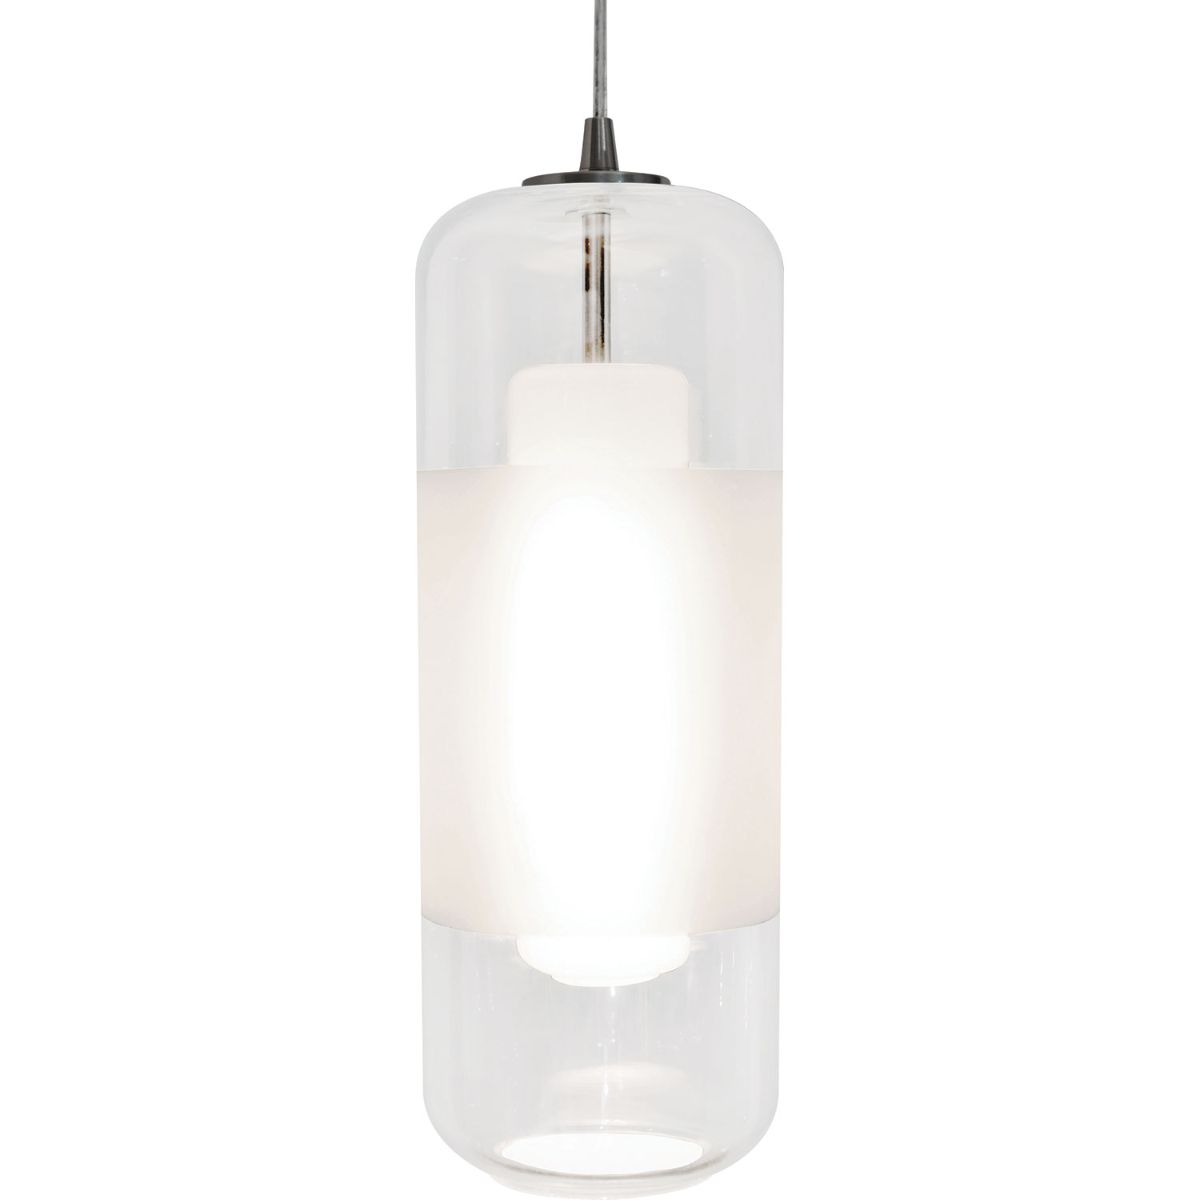 Hermosa 6 in. LED Pendant Light 120V 4000K Satin Nickel finish with Clear & White shade